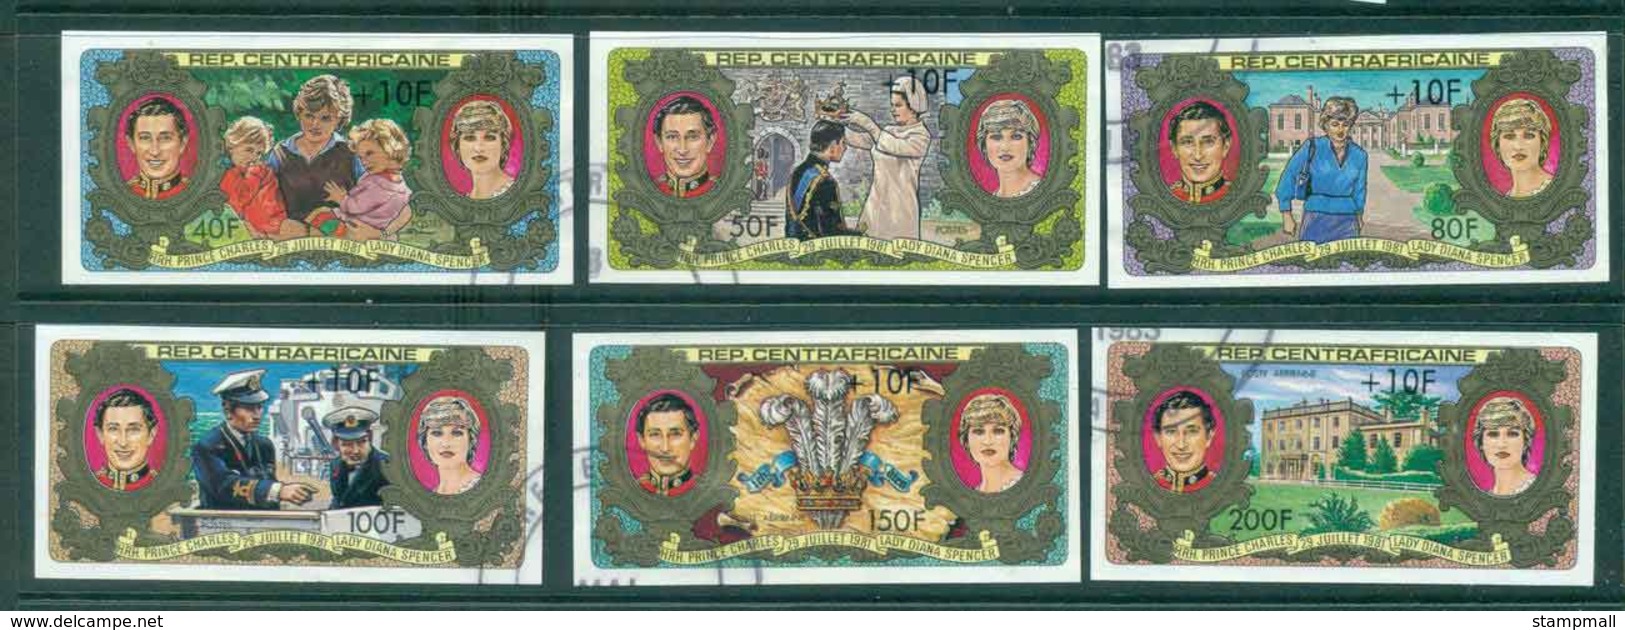 Central African Republic 1981 Charles & Diana Wedding Surcharged IMPERF FU Lot44900 - Central African Republic